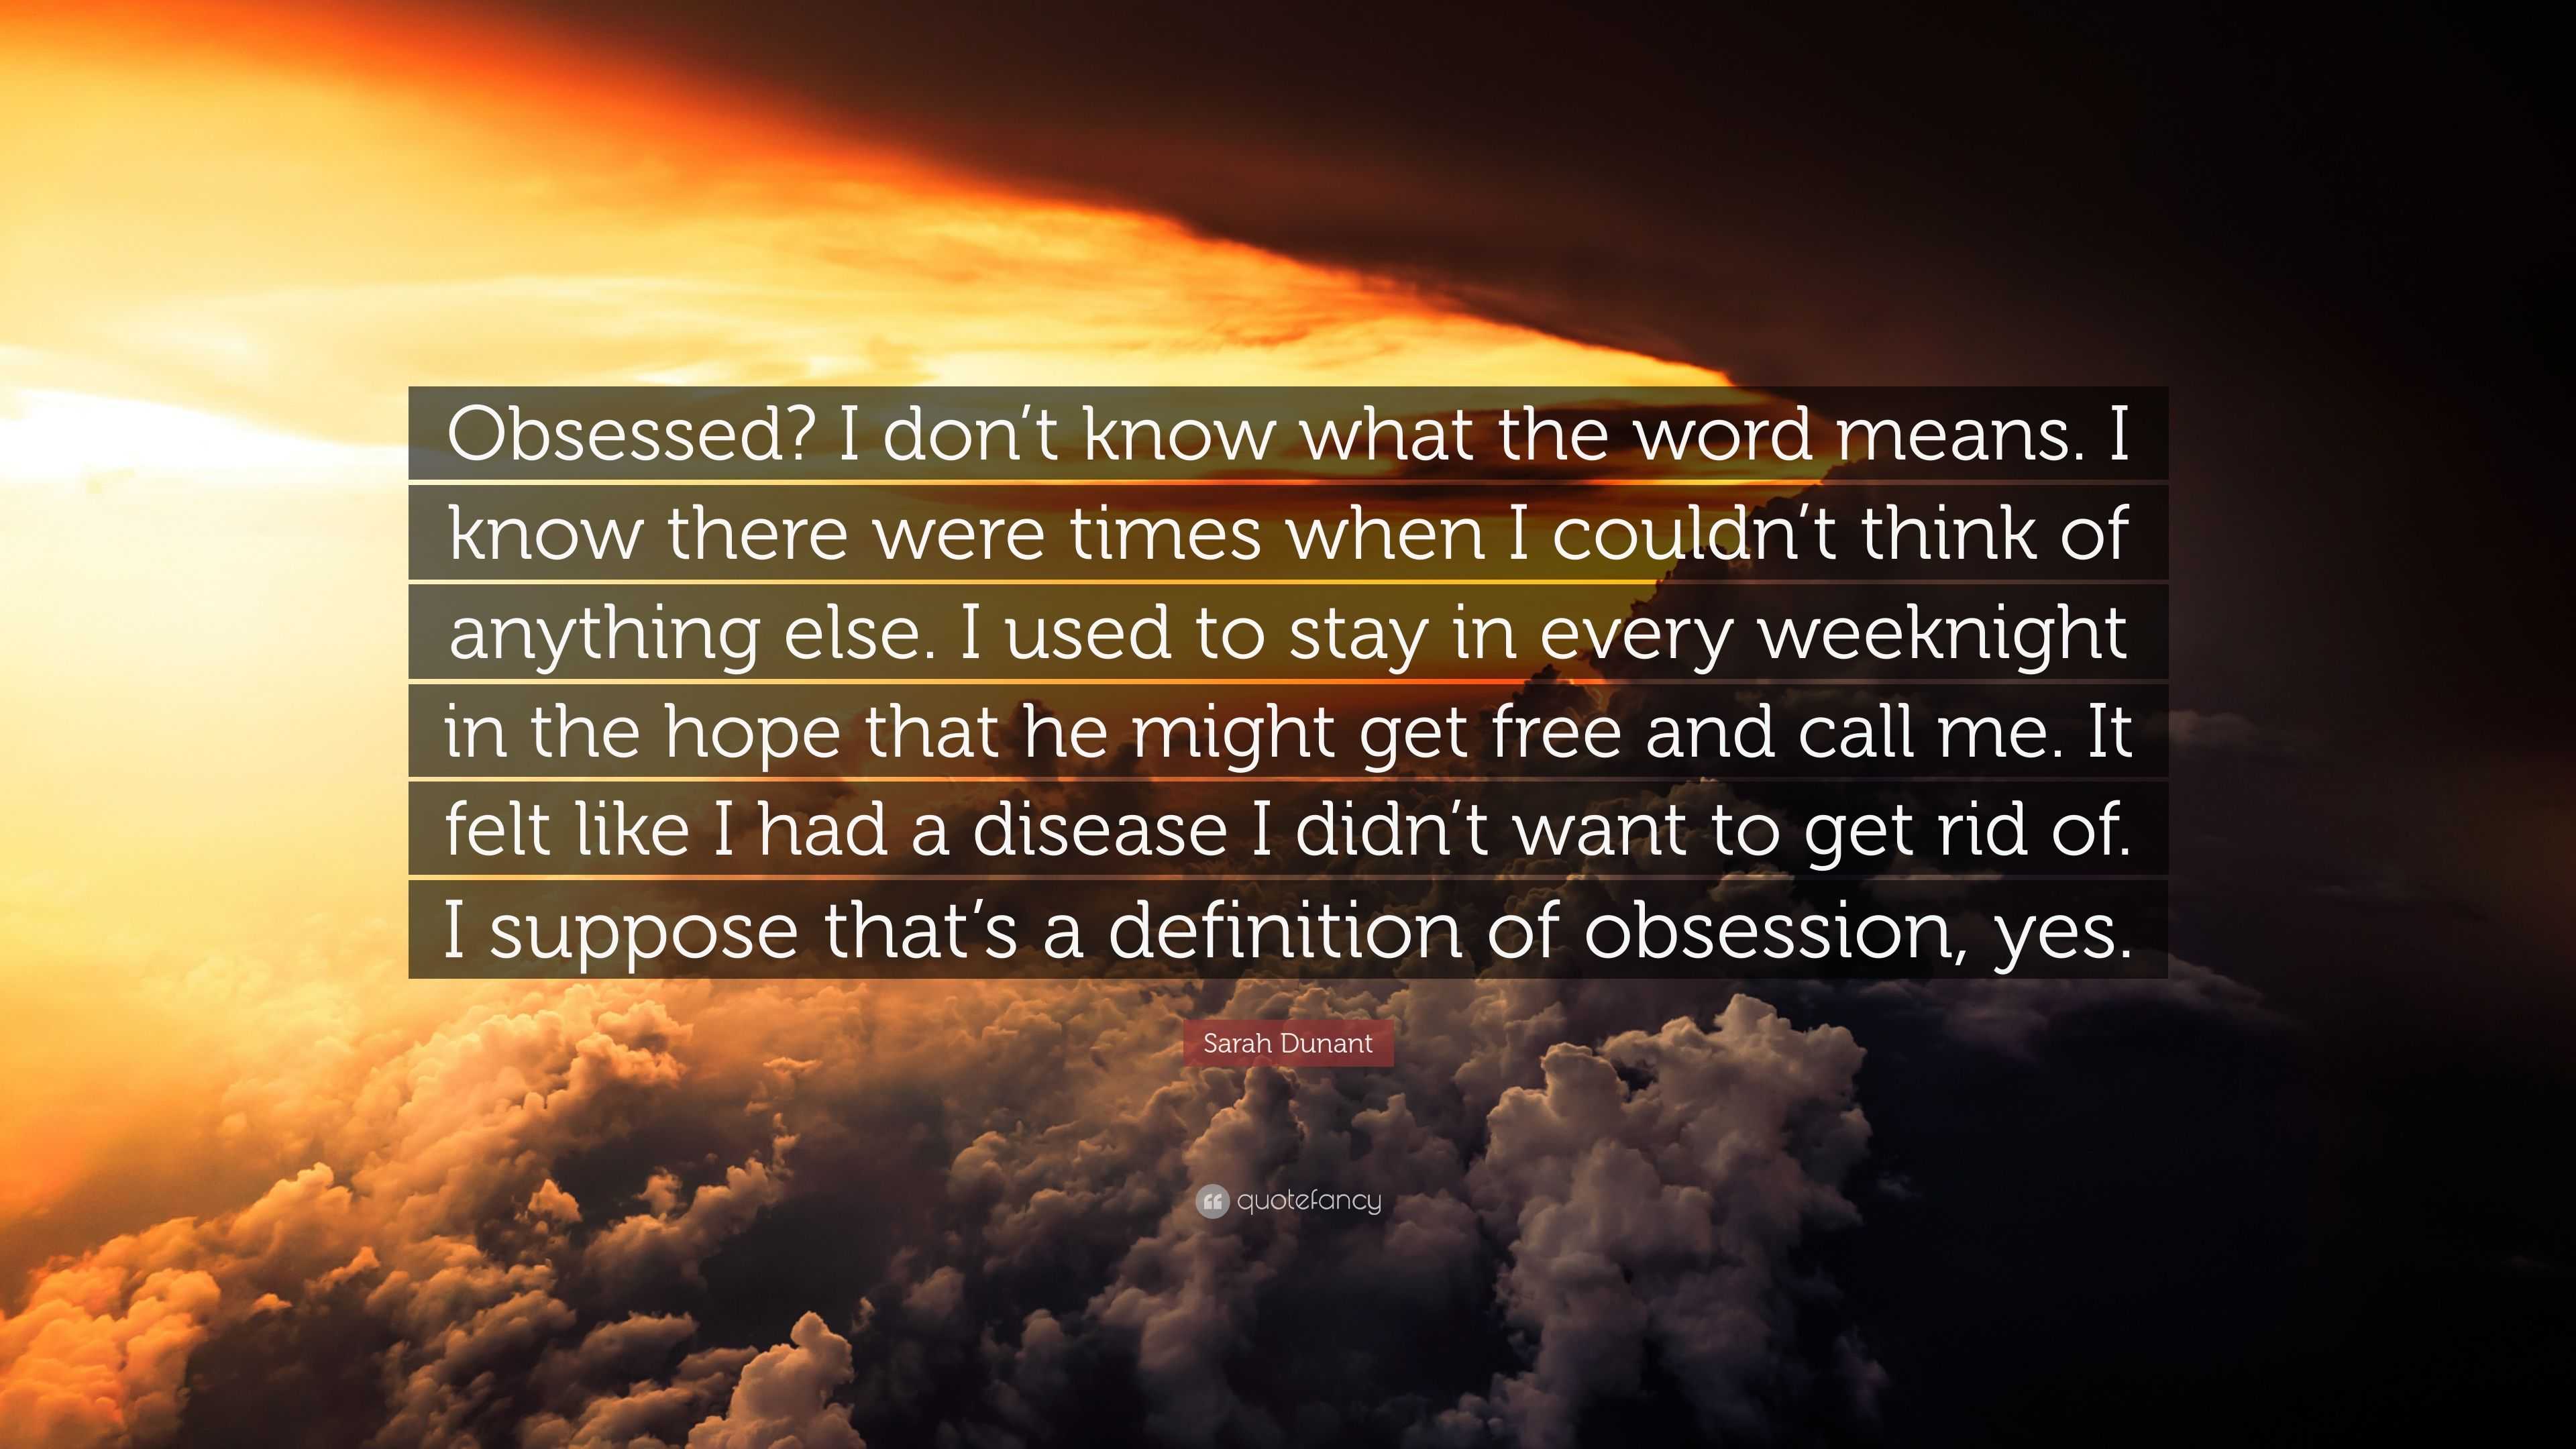 Sarah Dunant Quote: “Obsessed? I don’t know what the word means. I know ...